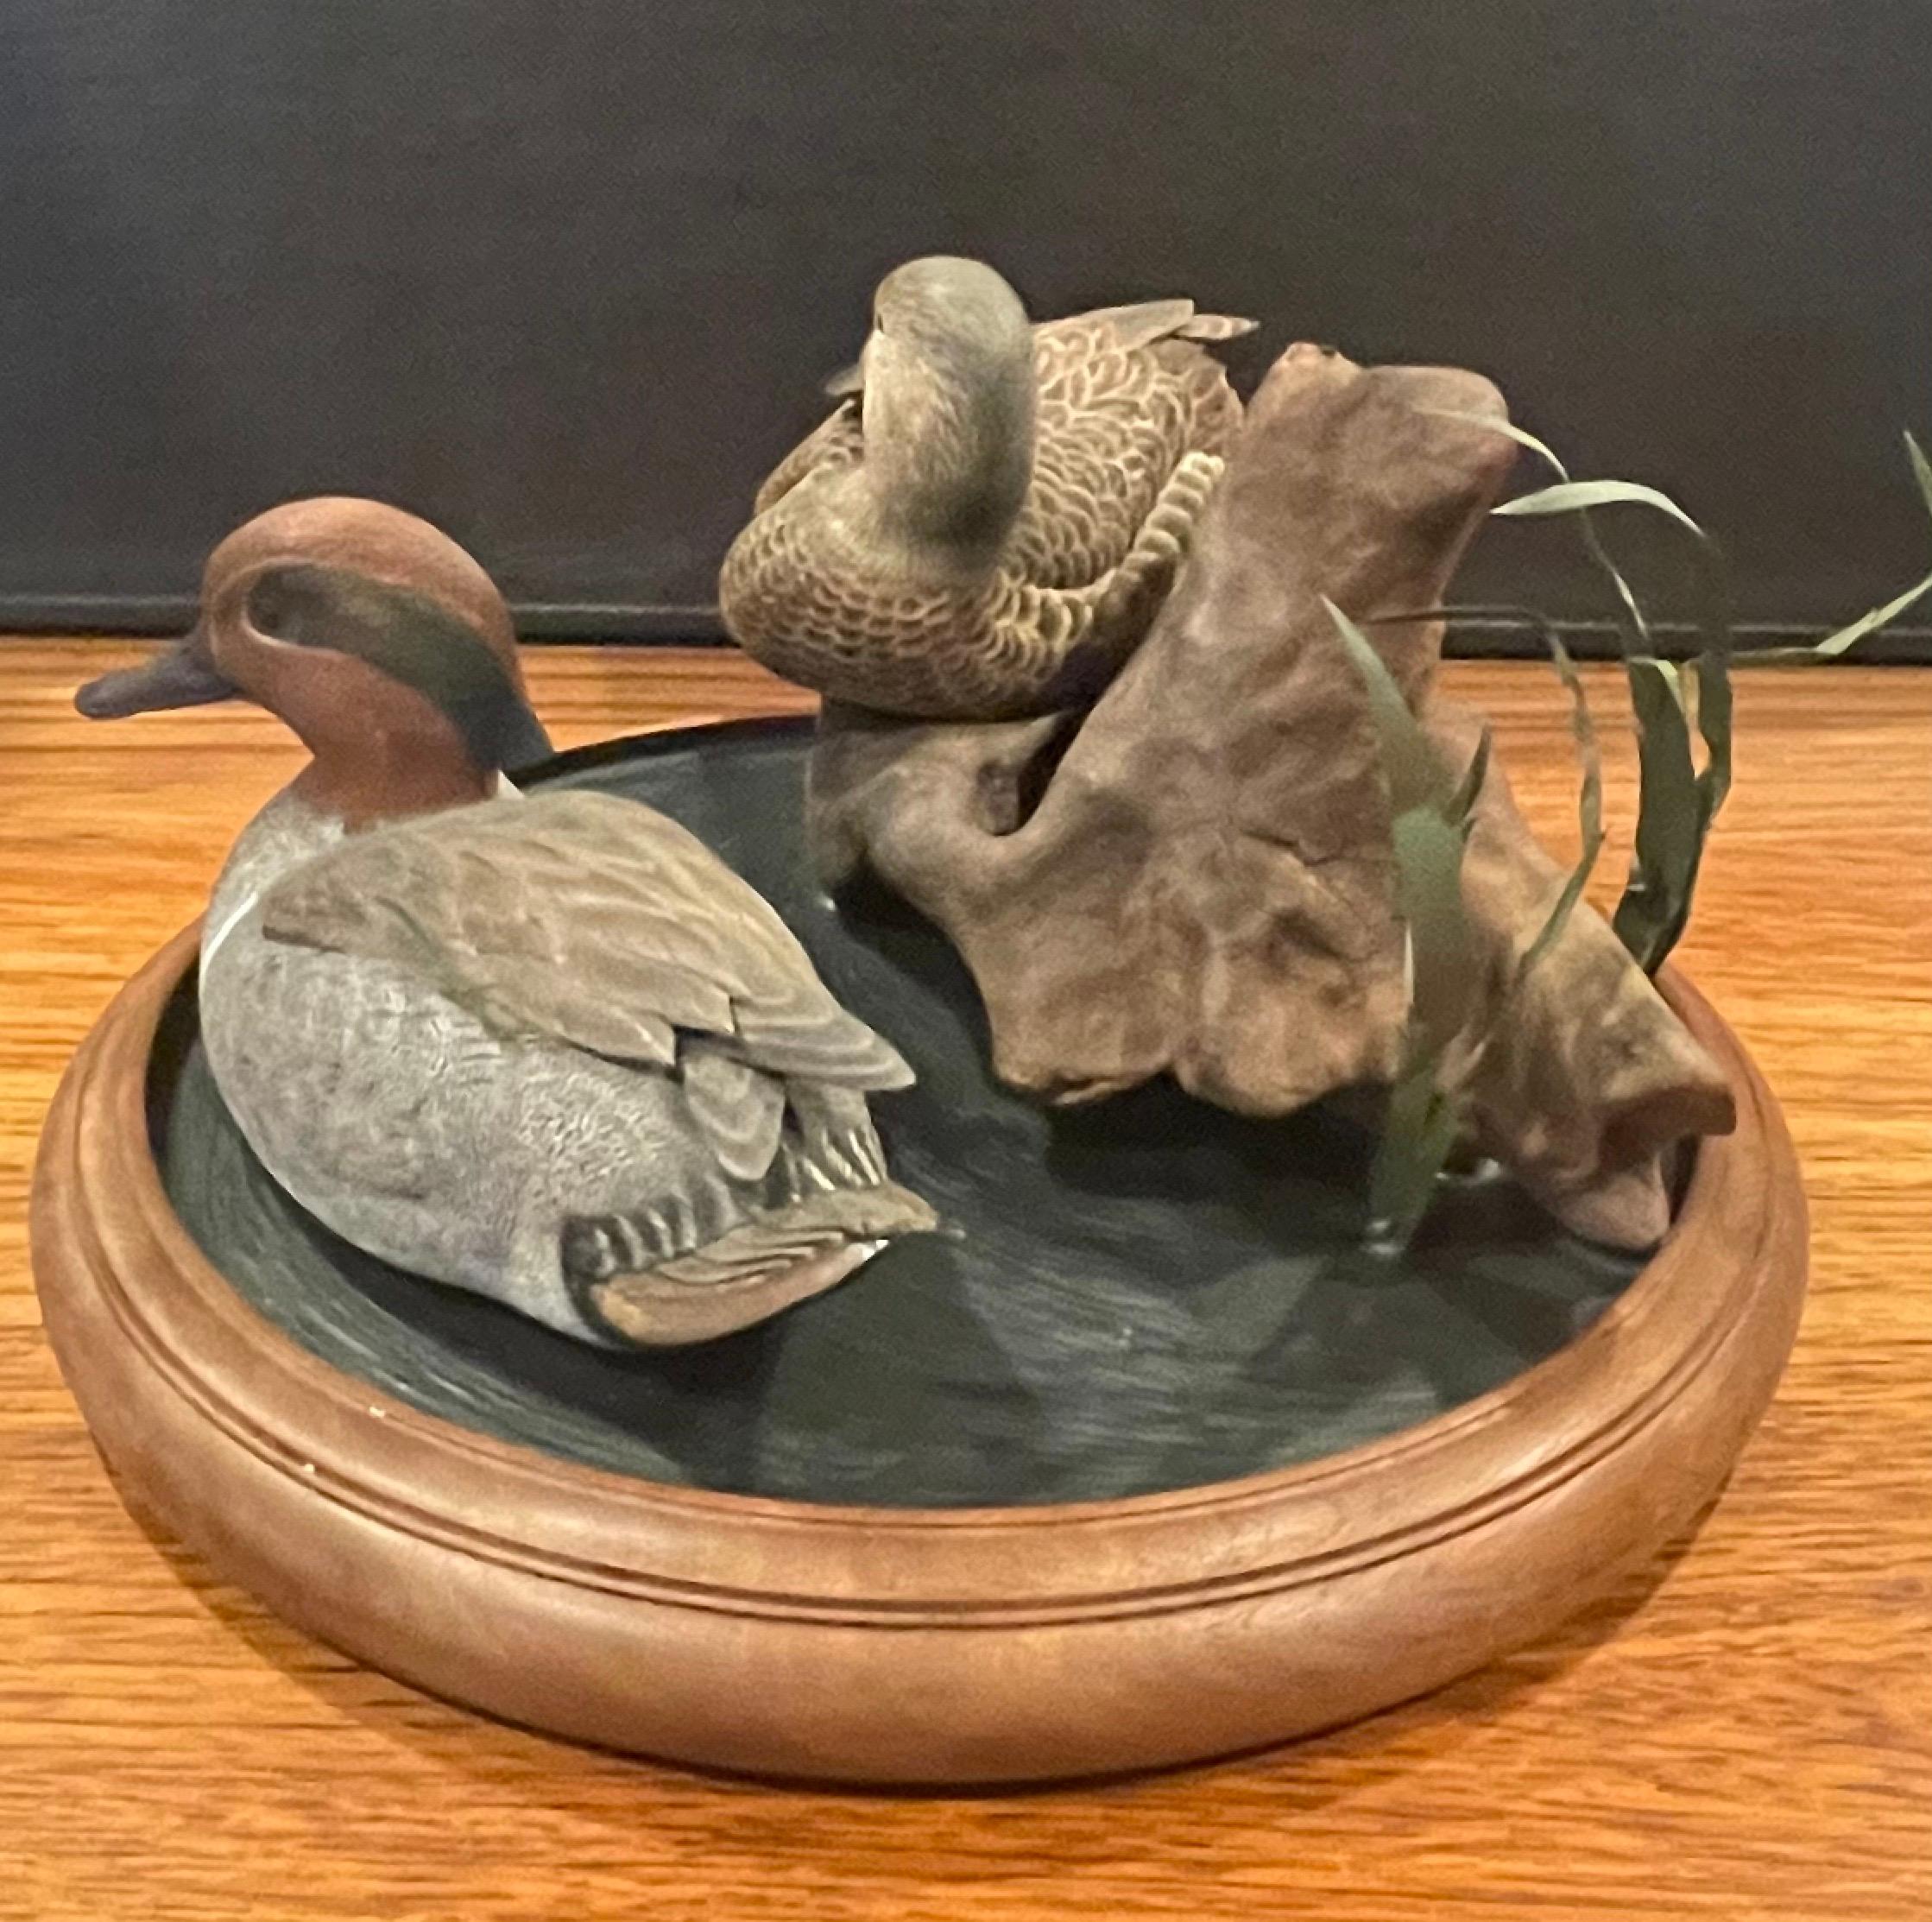 ducks unlimited decoys for sale